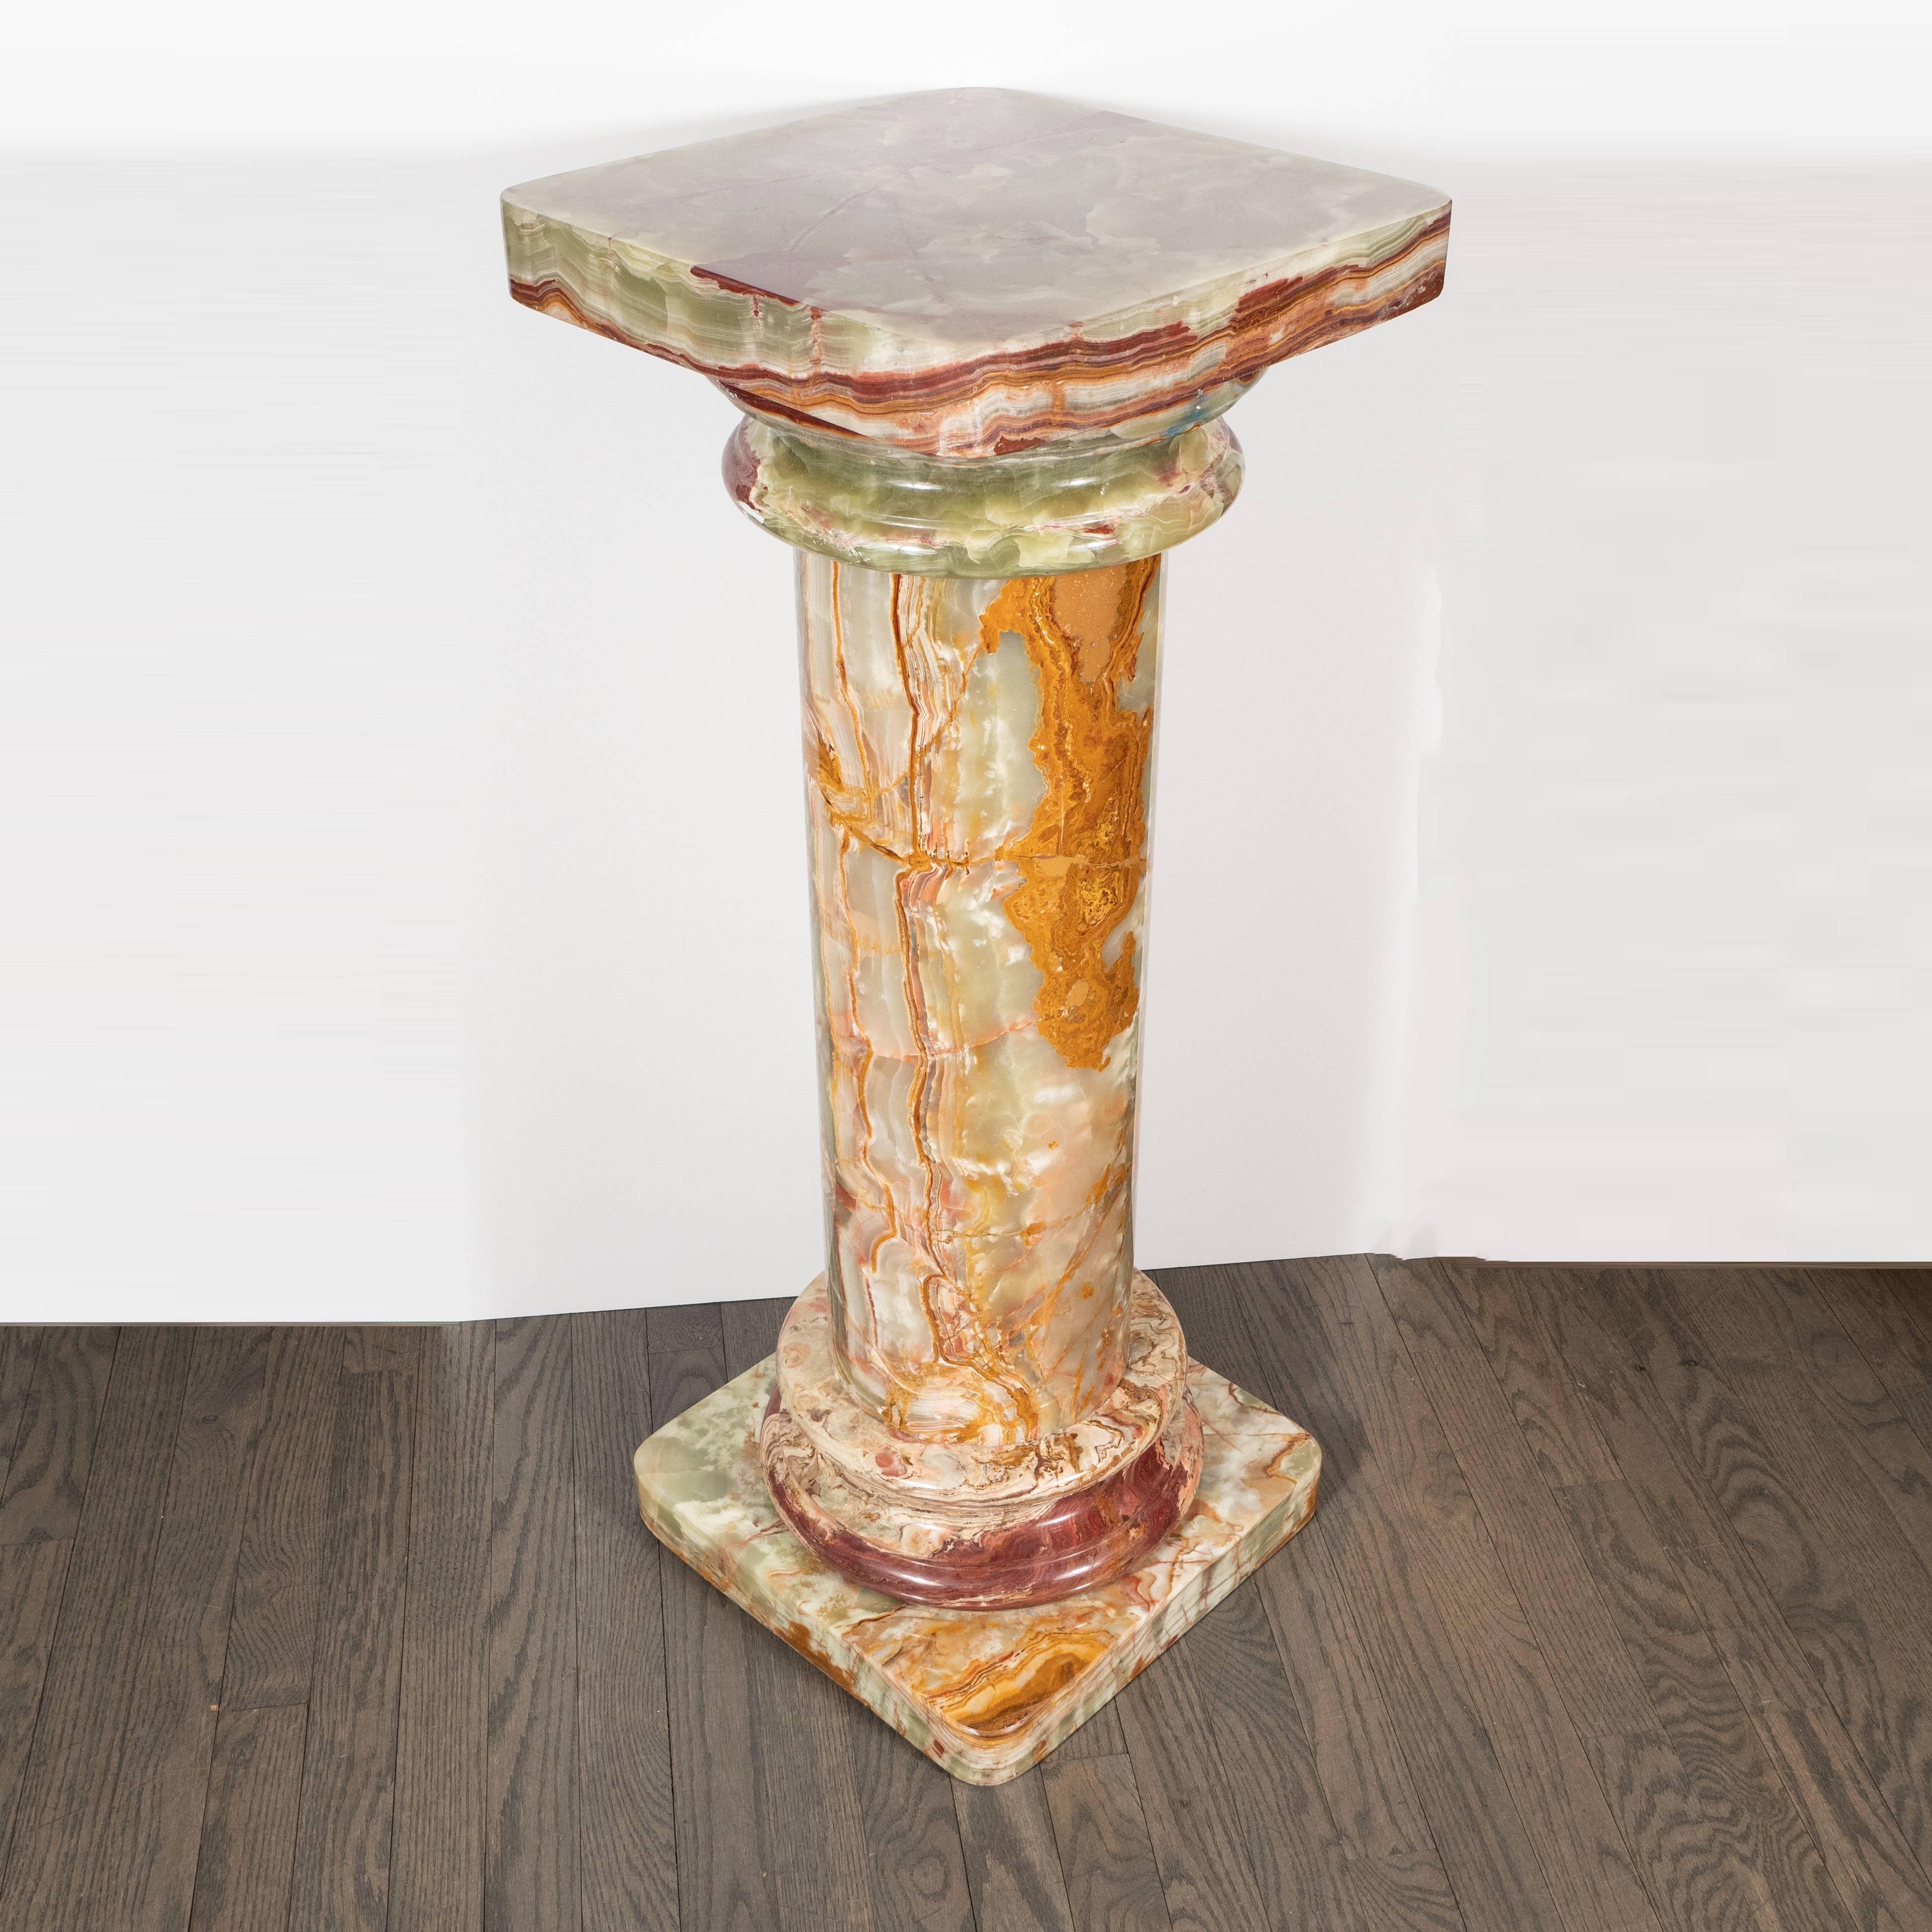 This stunning Doric column pedestal was realized in Italy, circa 1950. It features a square base with rounded corners and a matching top, and a cylindrical body framed on either side by ringed embellishments. The variegated Italian marble offers a